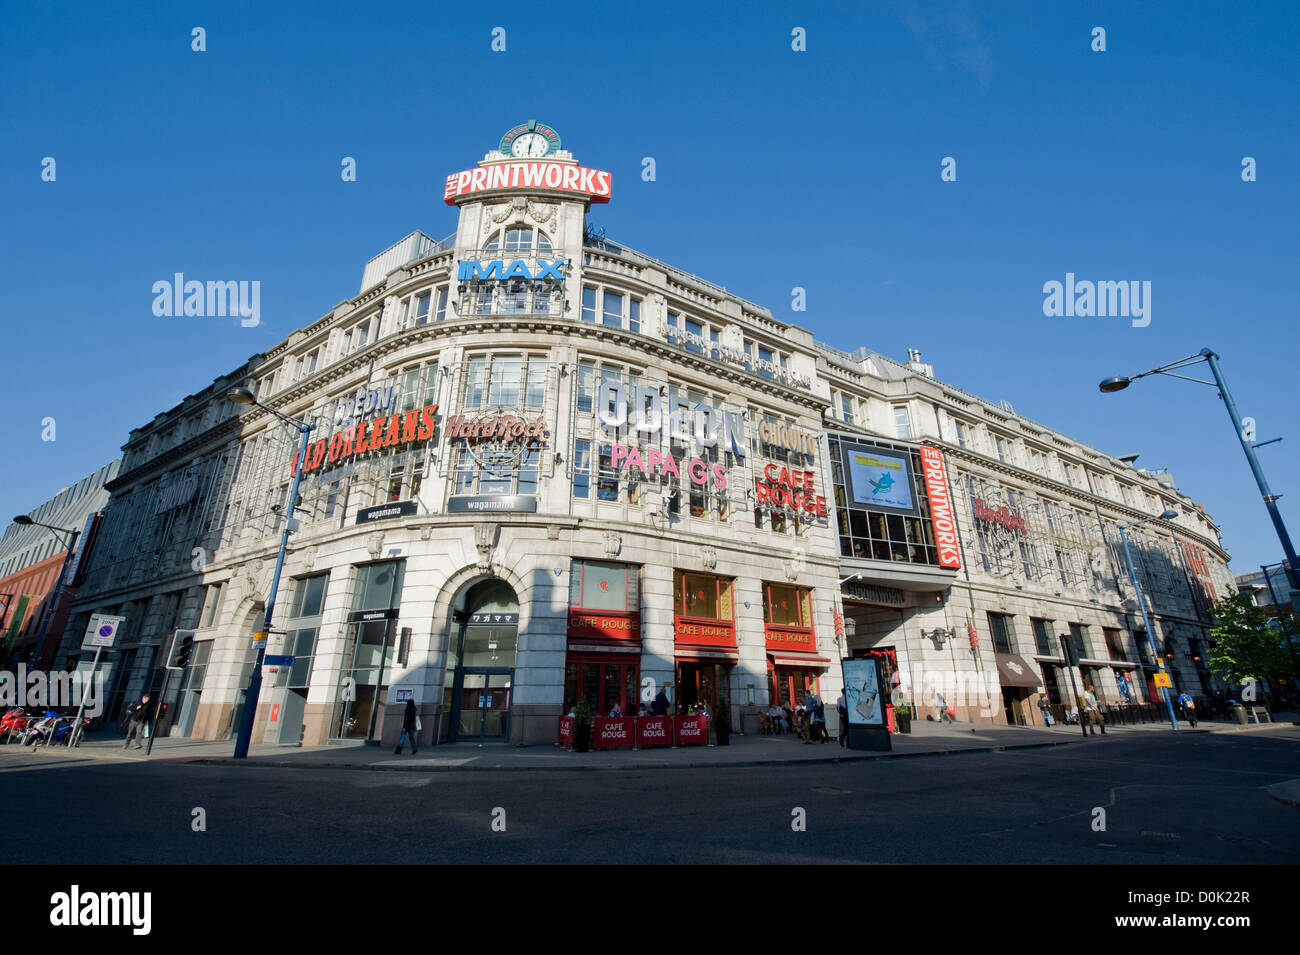 The Printworks Entertainment Complex in Manchester. Stock Photo